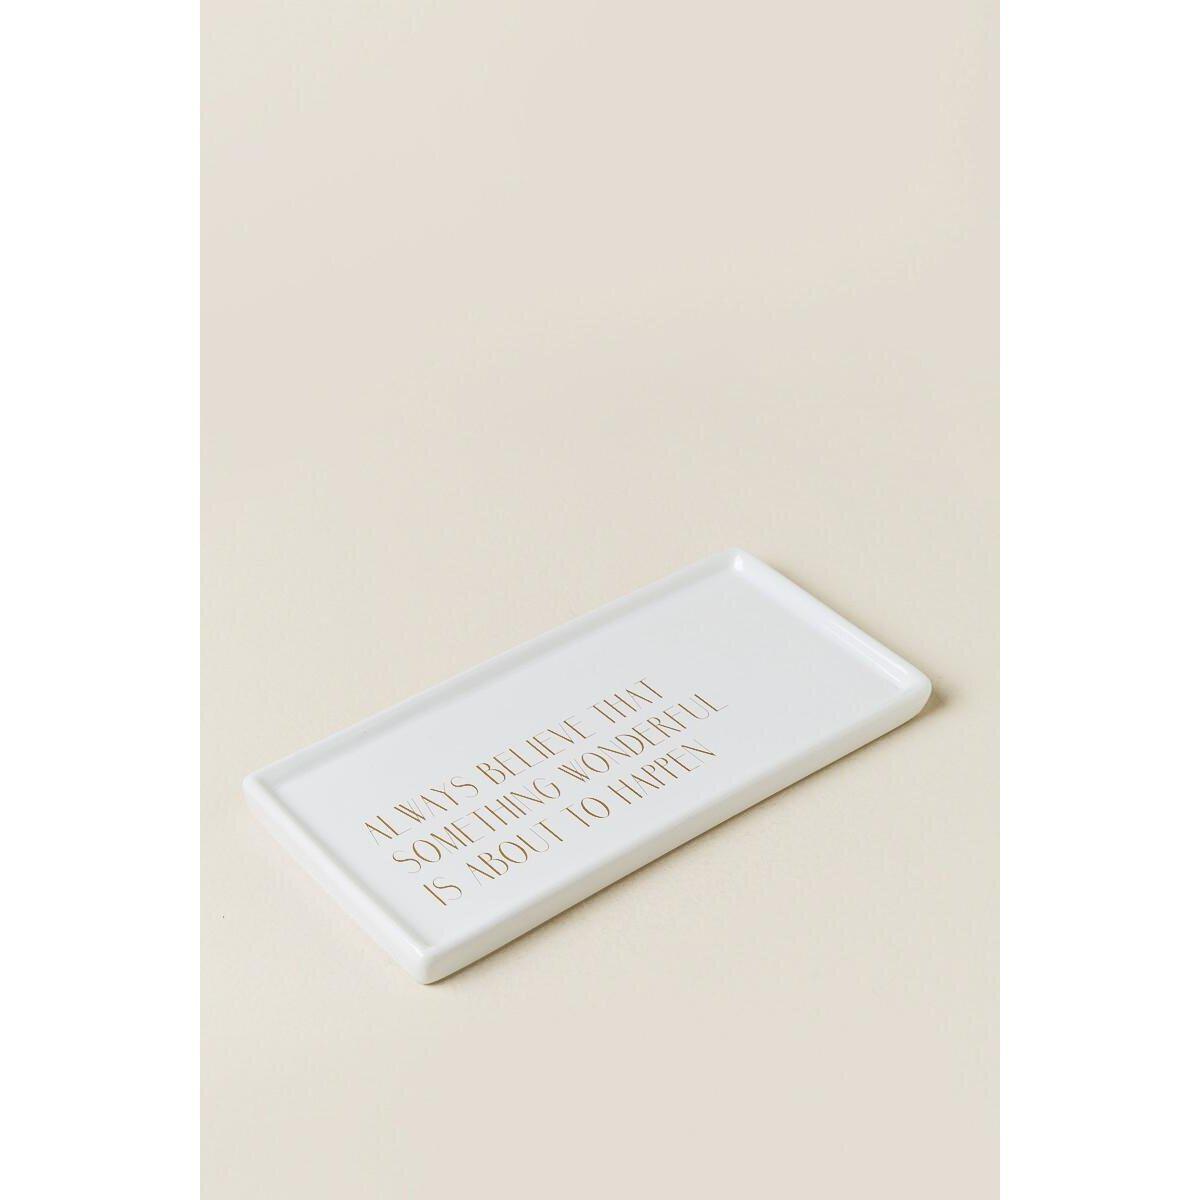 Decorative Tray: Always Believe Something Wonderful is About to Happen